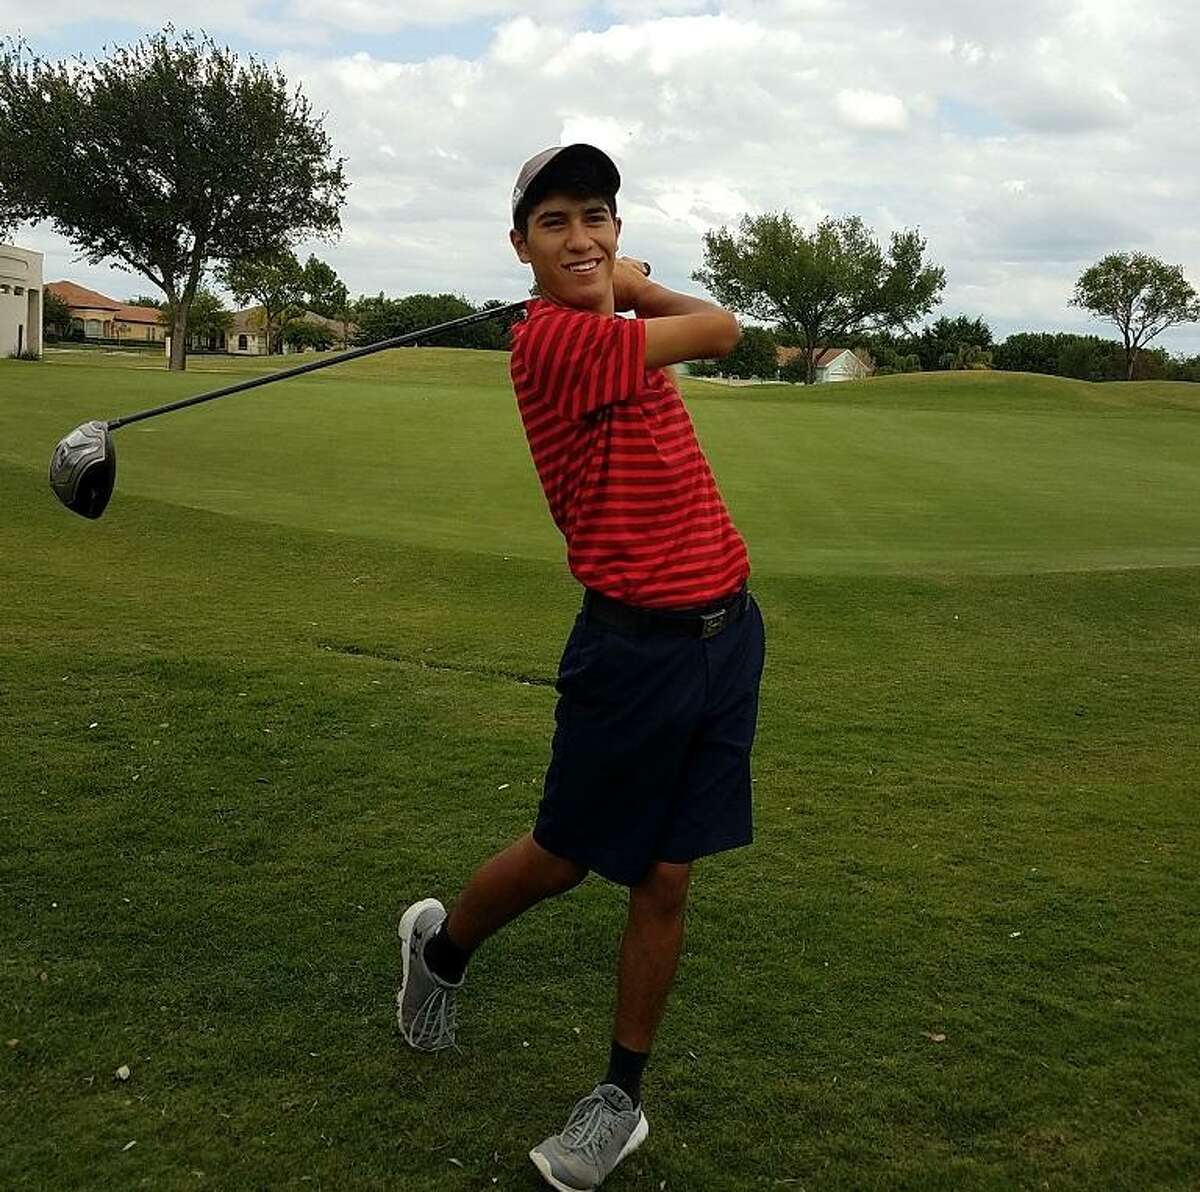 Felix Gamez shot a 158 (77-81) at the district tournament to become Martin’s first regional qualifier in 16 years.